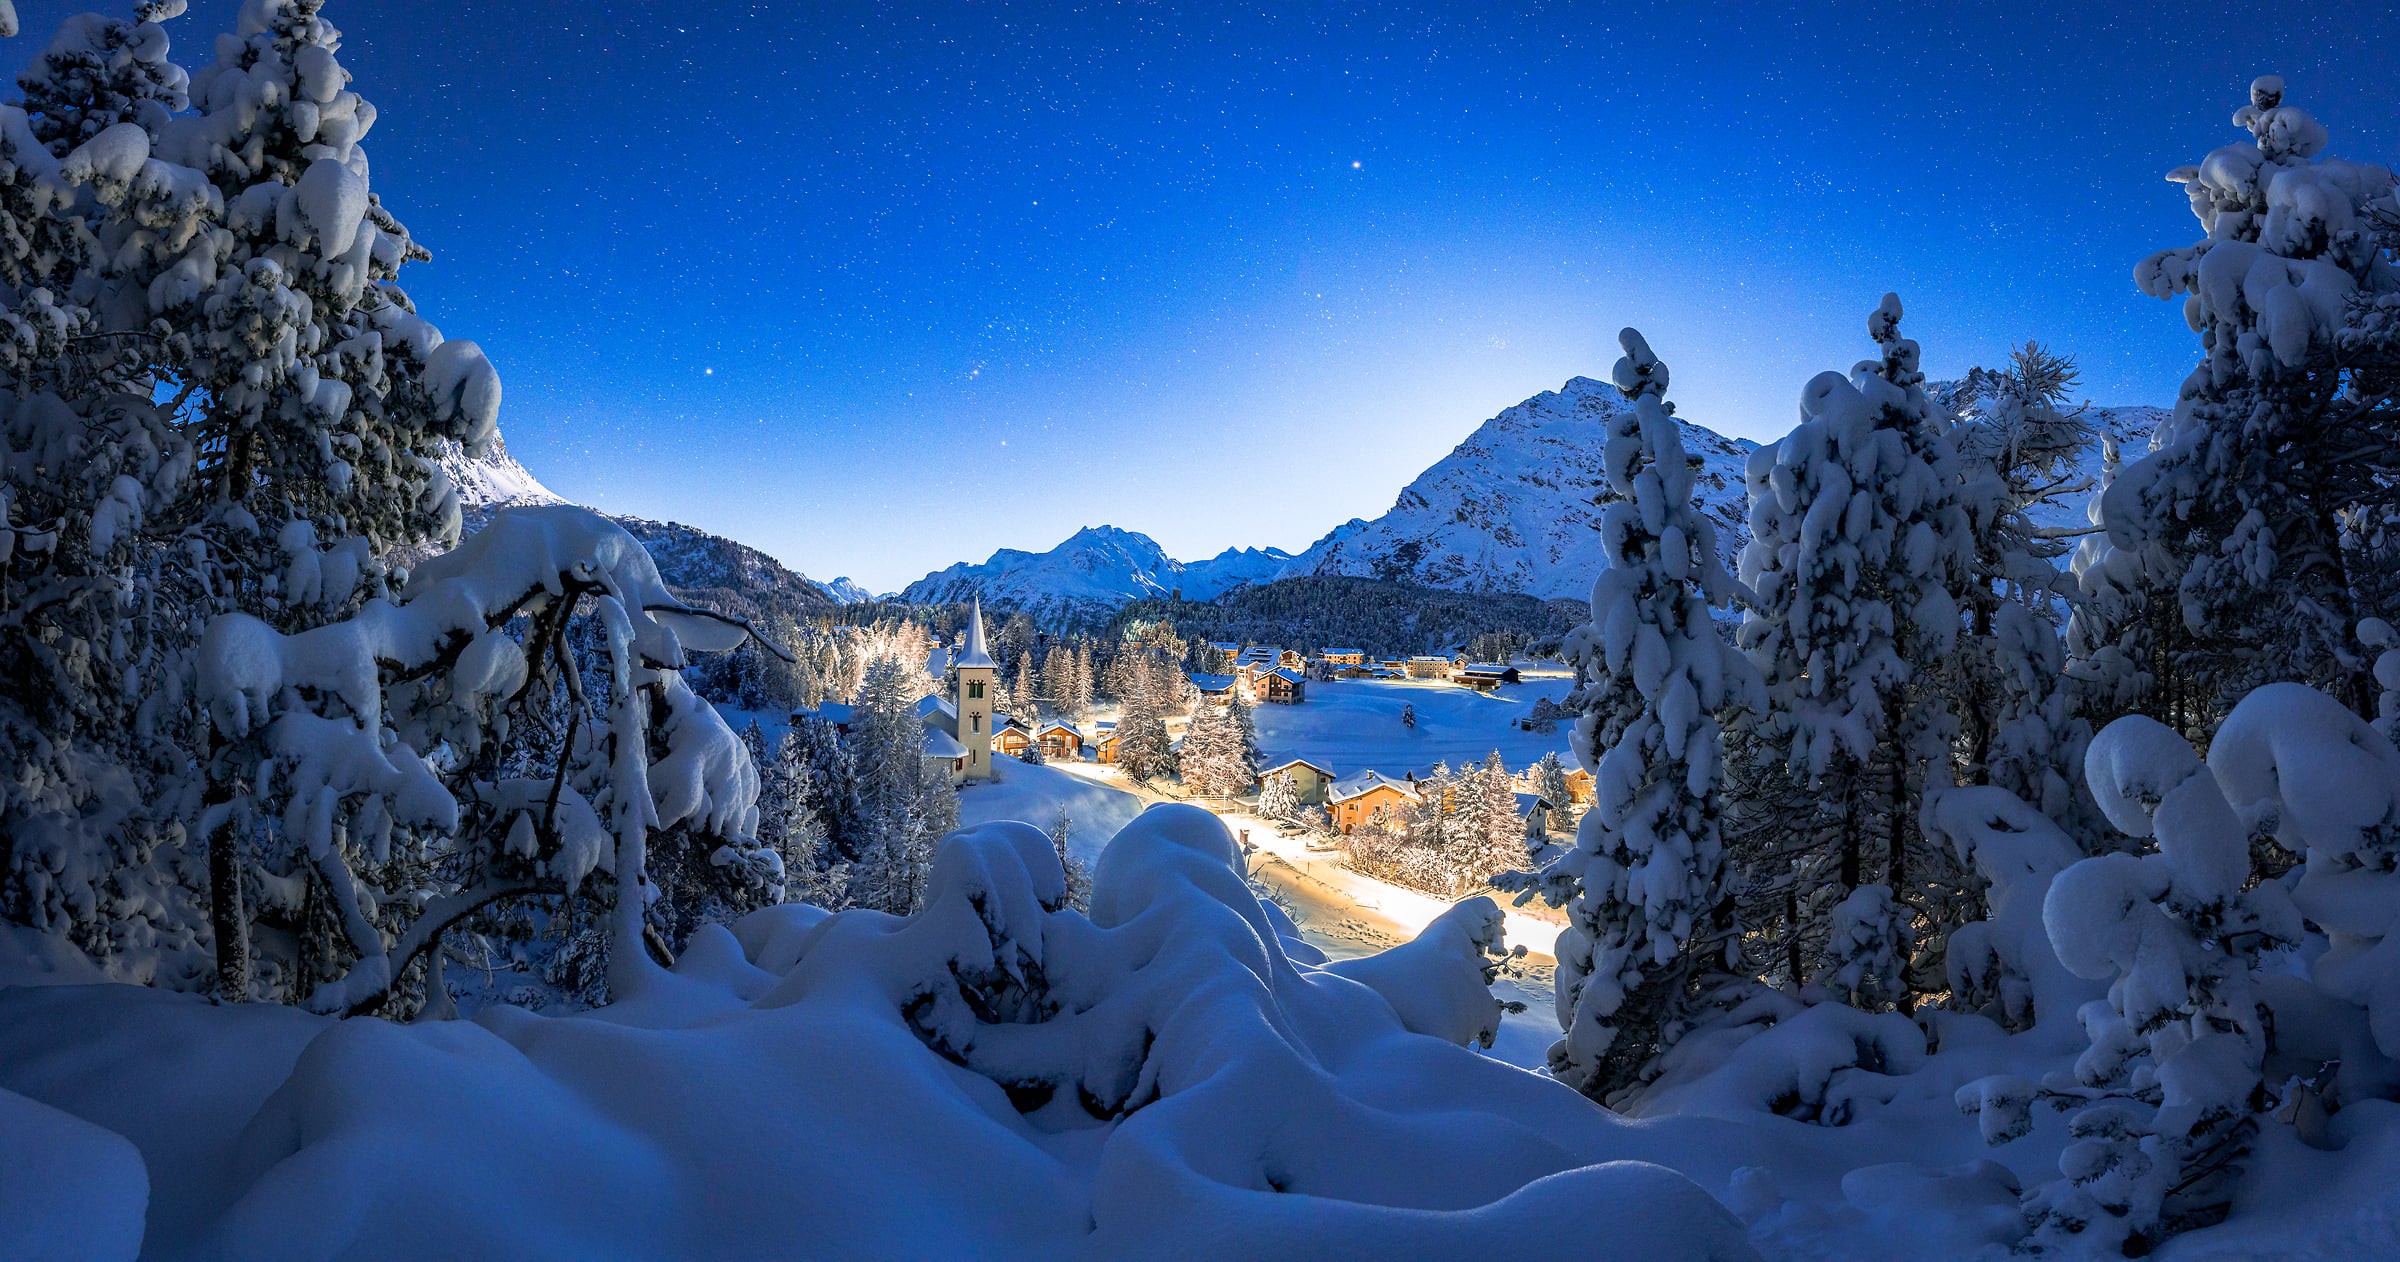 102 megapixels! A very high resolution, large-format VAST photo print of a white Christmas scene with snowy trees, a quaint town, mountains, the stars; art photograph created by Roberto Moiola in Maloja Pass, Switzerland.